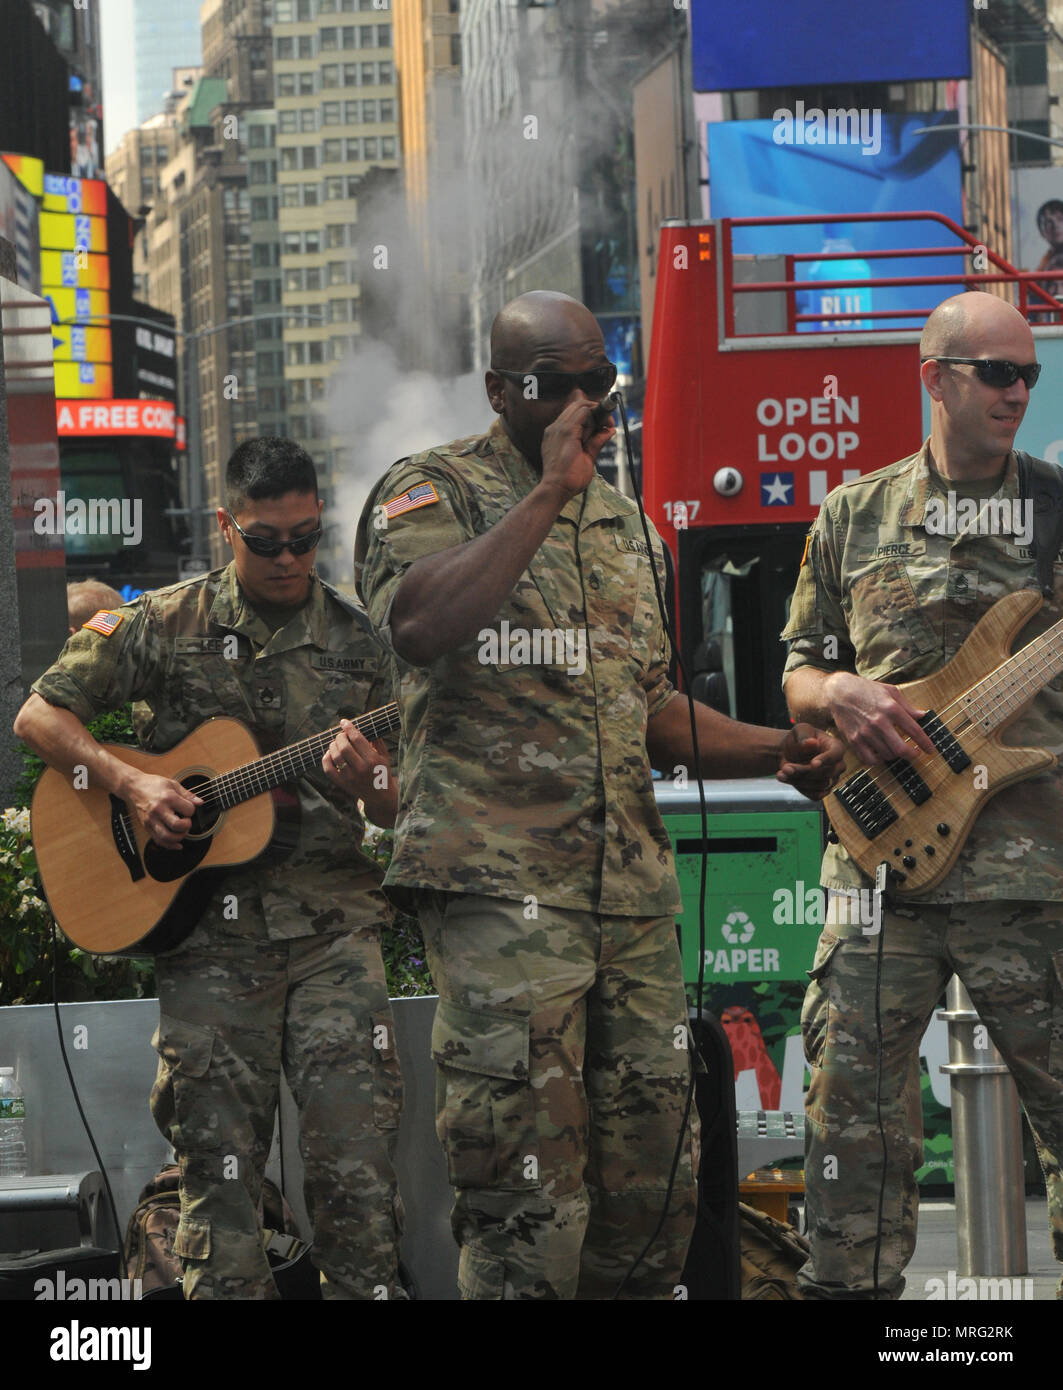 Staff Sgt. Jeremy Gaynor, alongside SSG Jongyoon Lee (left) and Master Sgt. Dan Pierce, with the West Point Benny Havens Band, perform in New York City's Times Square for the Army's 242nd Birthday. Members of the Benny Havens Band did a parks and subways tour throughout the city by playing six mini-concerts in various locations to highlight the Army's Birthday. (U.S. Army photo by Staff Sgt. Alejandro Canizales (released). Stock Photo